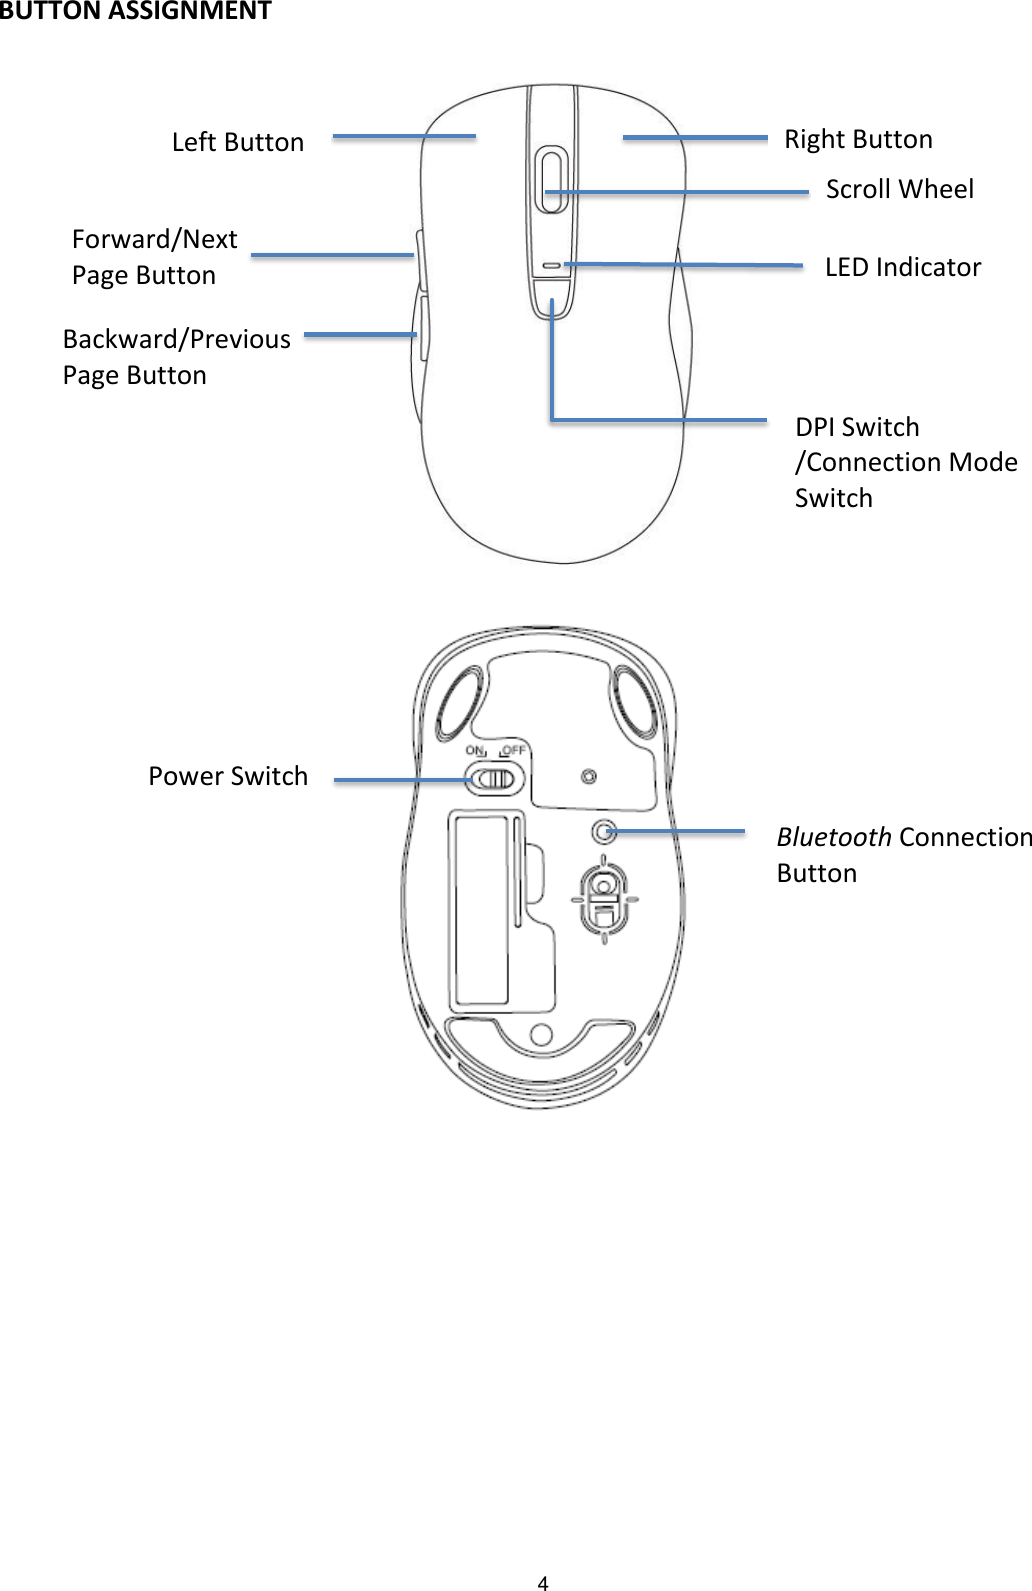 4 Forward/Next Page Button Backward/Previous Page Button Power Switch Bluetooth Connection Button BUTTON ASSIGNMENT                                  Right Button Left Button Scroll Wheel LED Indicator   DPI Switch /Connection Mode Switch 